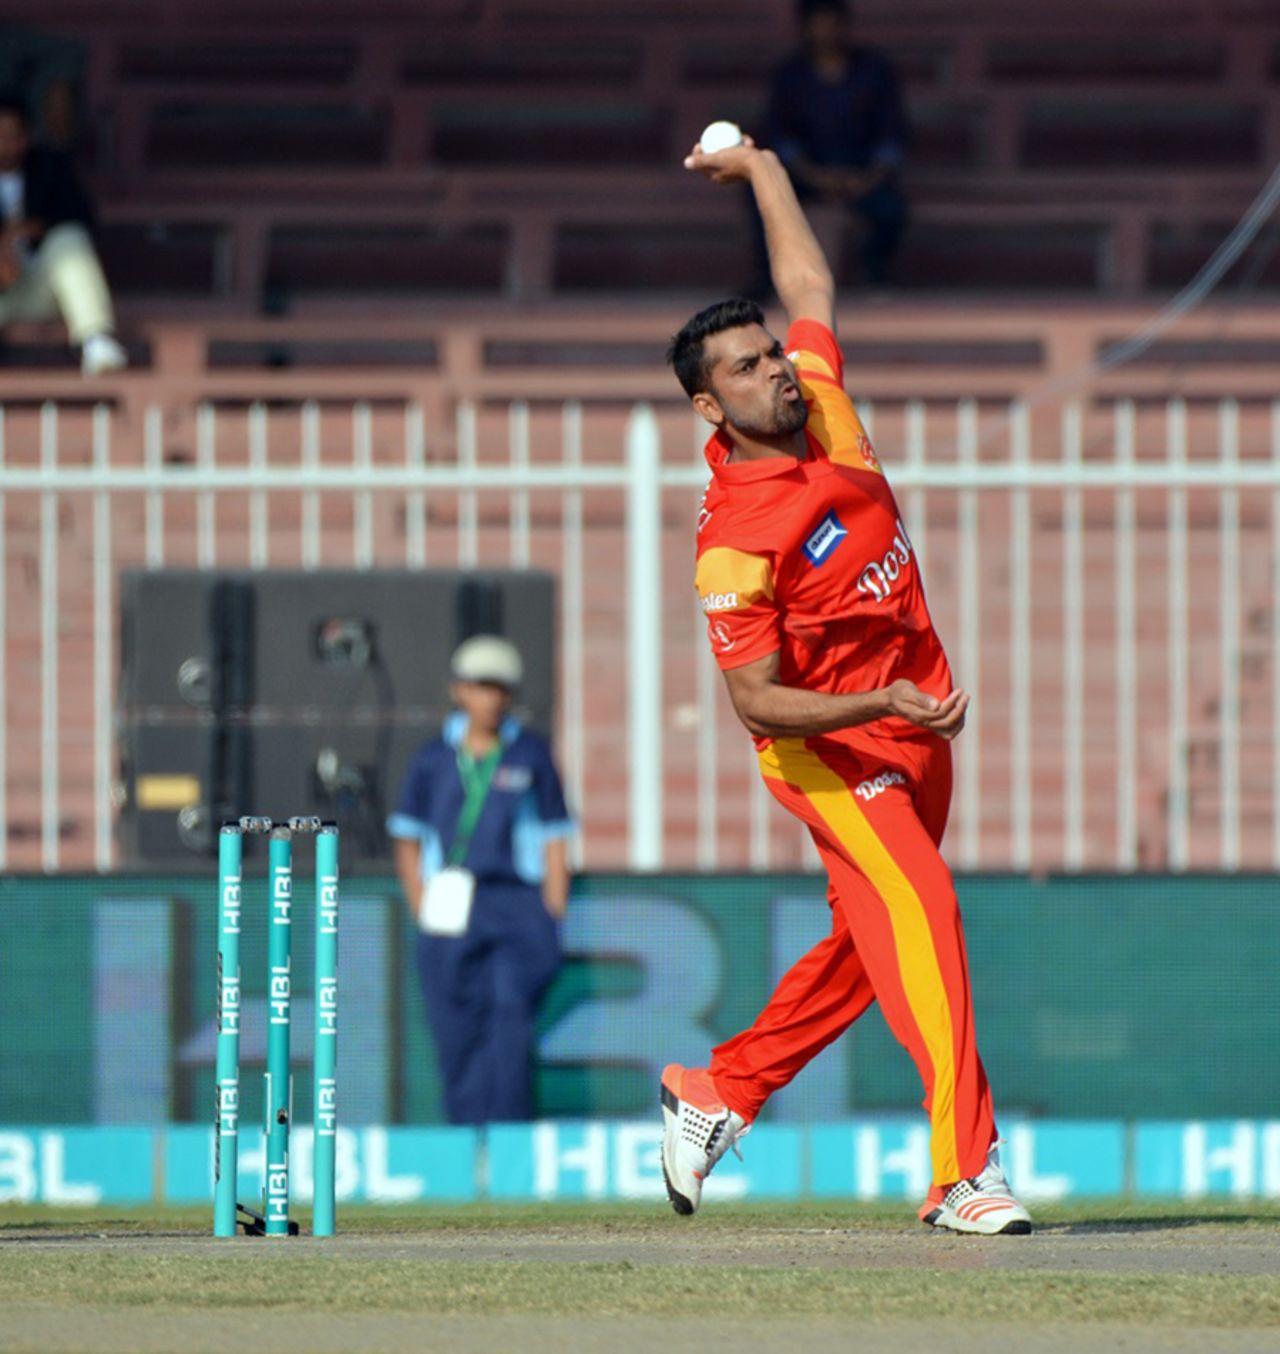 Imran Khalid was the most successful bowler for Islamabad United with returns of 2 for 19, Islamabad United v Karachi Kings, Pakistan Super League 2016, Sharjah, February 14, 2016